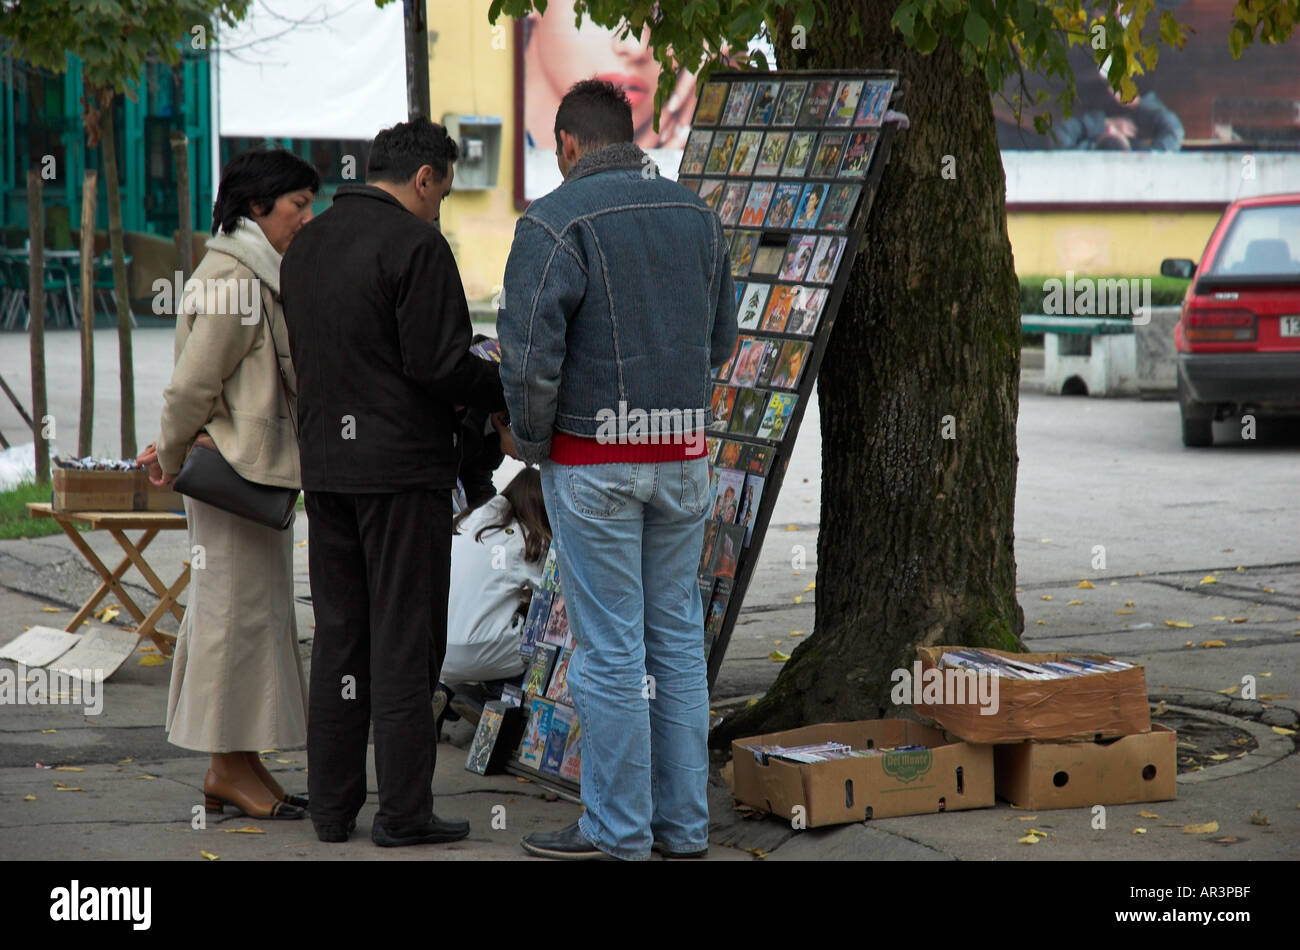 Street side stall selling pirated Cds in Eastern Europe Stock Photo